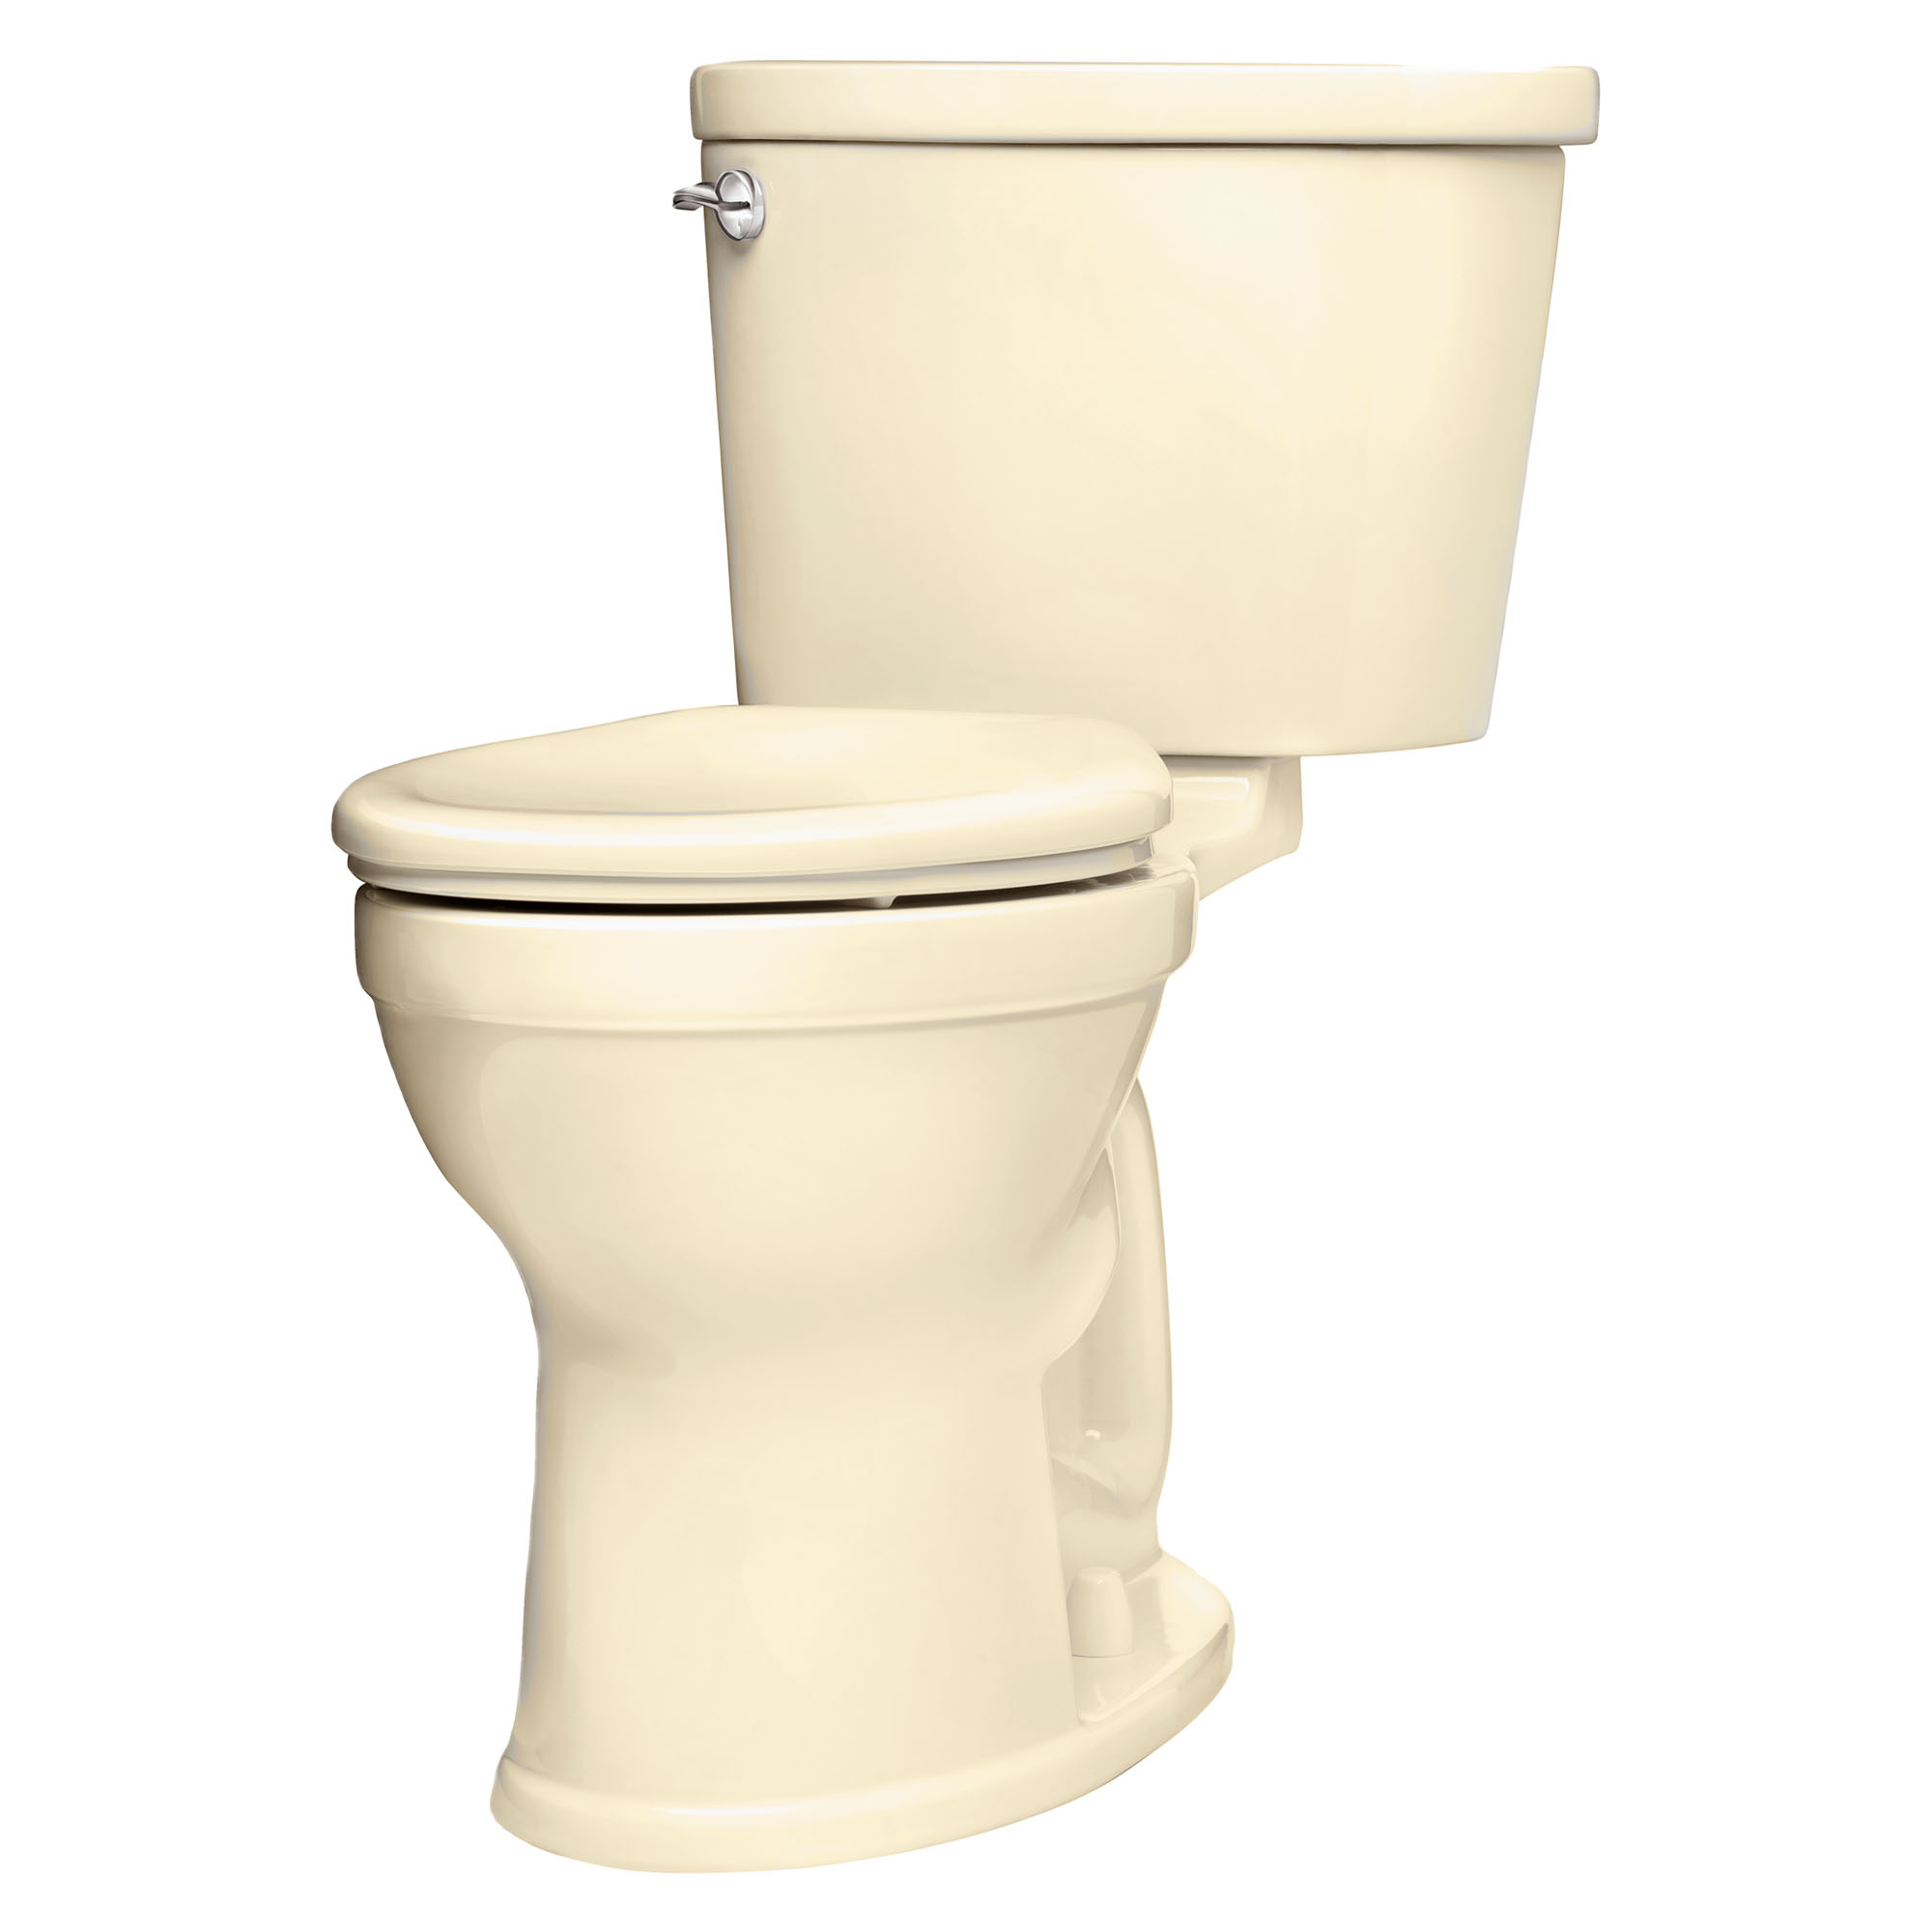 Champion® PRO Two-Piece 1.6 gpf/6.0 Lpf Chair Height Round Front Toilet Less Seat